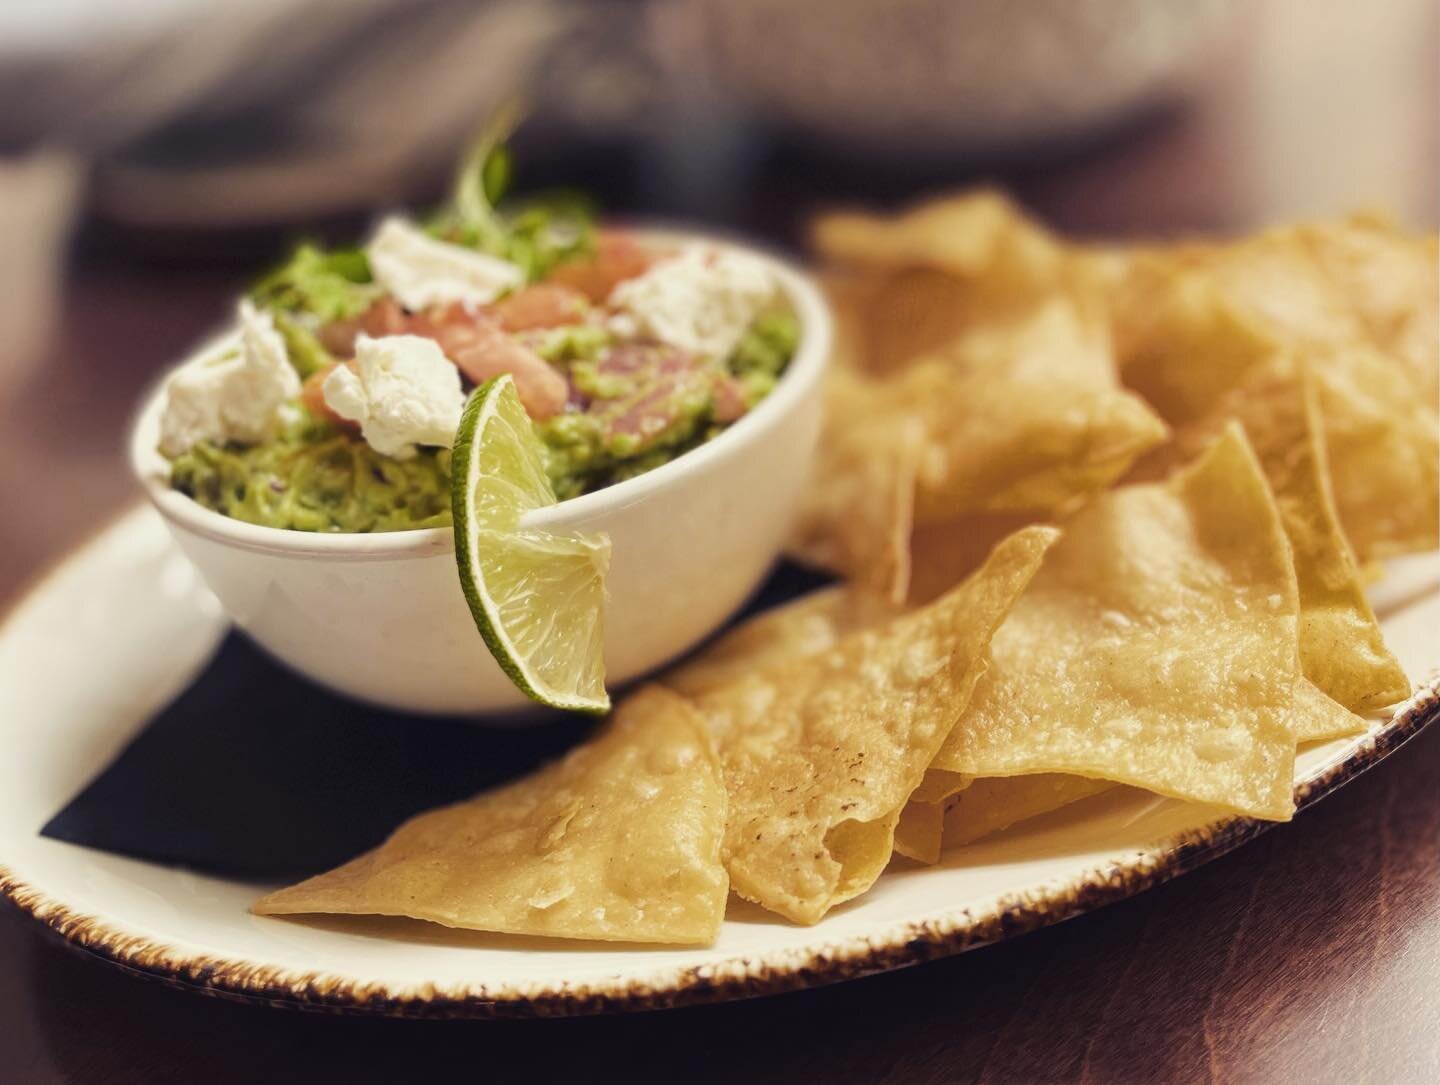 Features are back!!! 

Kick off your weekend with our Goat Guac or Bull Bites, available all day! 

#guac #lunch #features #noa #noaminneapolis #happyhour #mpls #mplshappyhour #steakbites #mplsfoodie #mplsfood